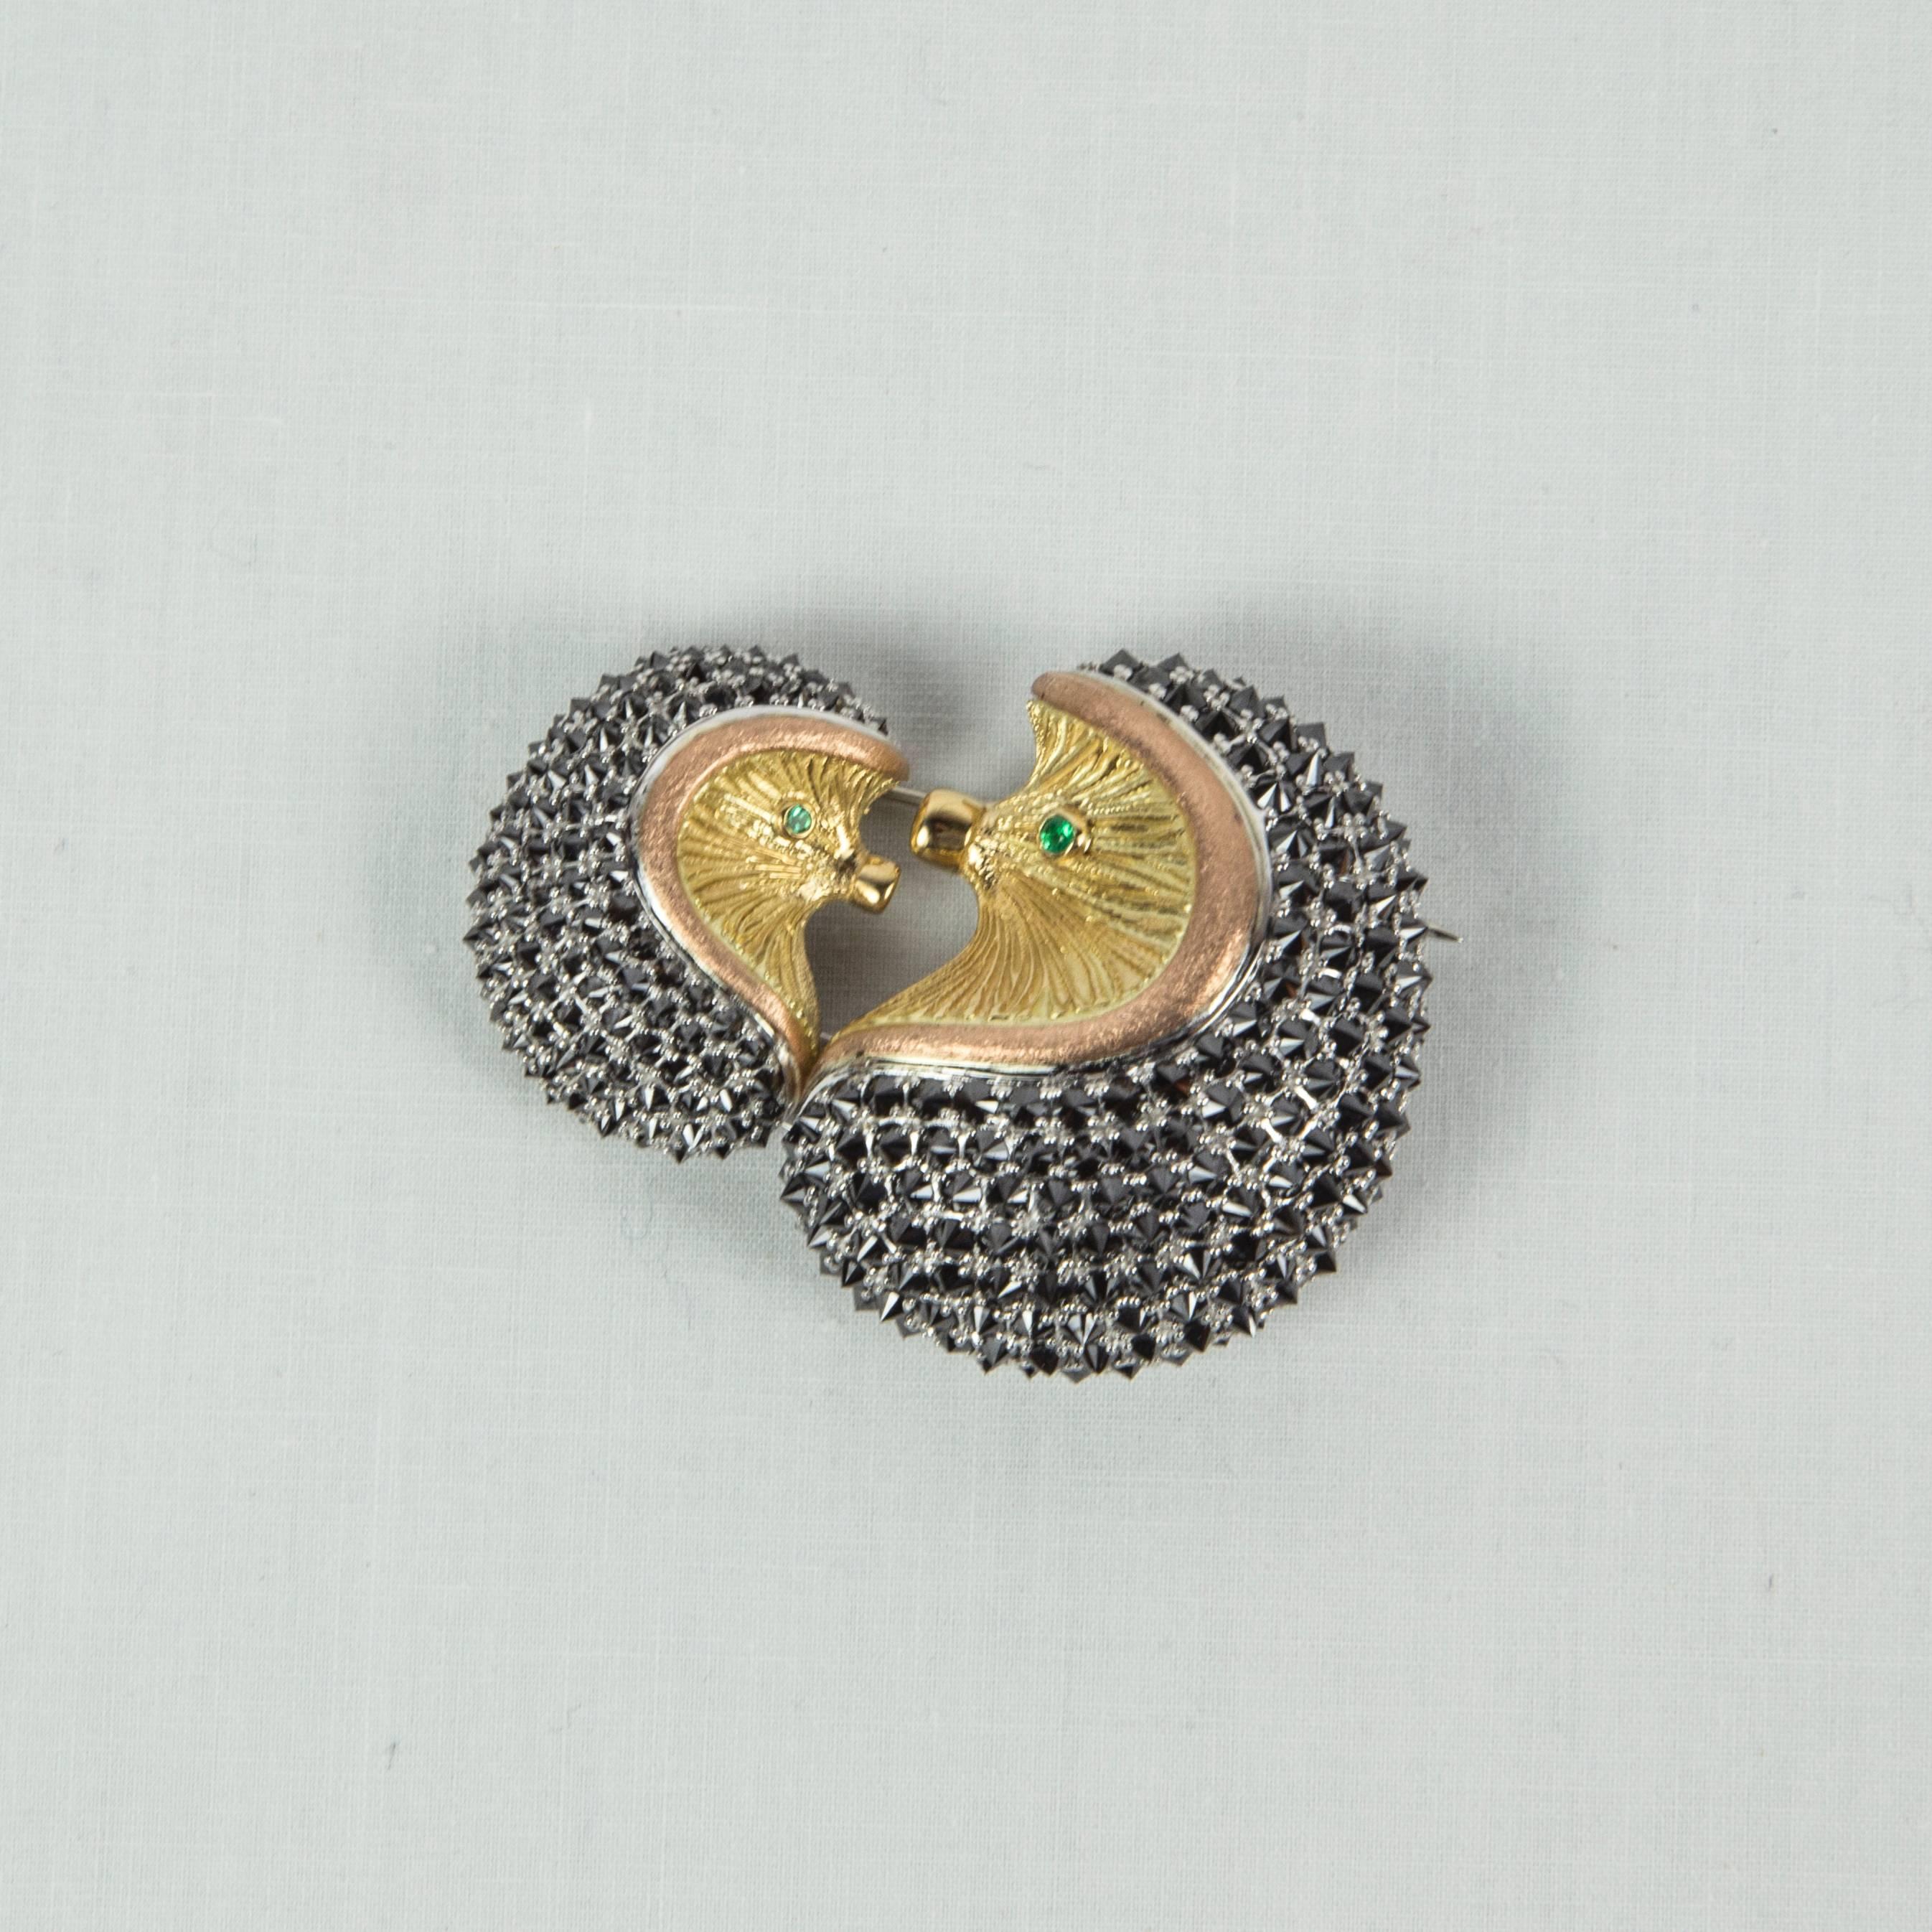 Delightful Mother and Baby Hedgehog Brooch pave set with 260 black diamonds weighing approx. 12.63ct; hand crafted in 18k multi colored white, yellow and rose gold; Emerald set eyes. Approx. size: 2” x 1.5”. Approx. weight: 43.07gm. A perfect